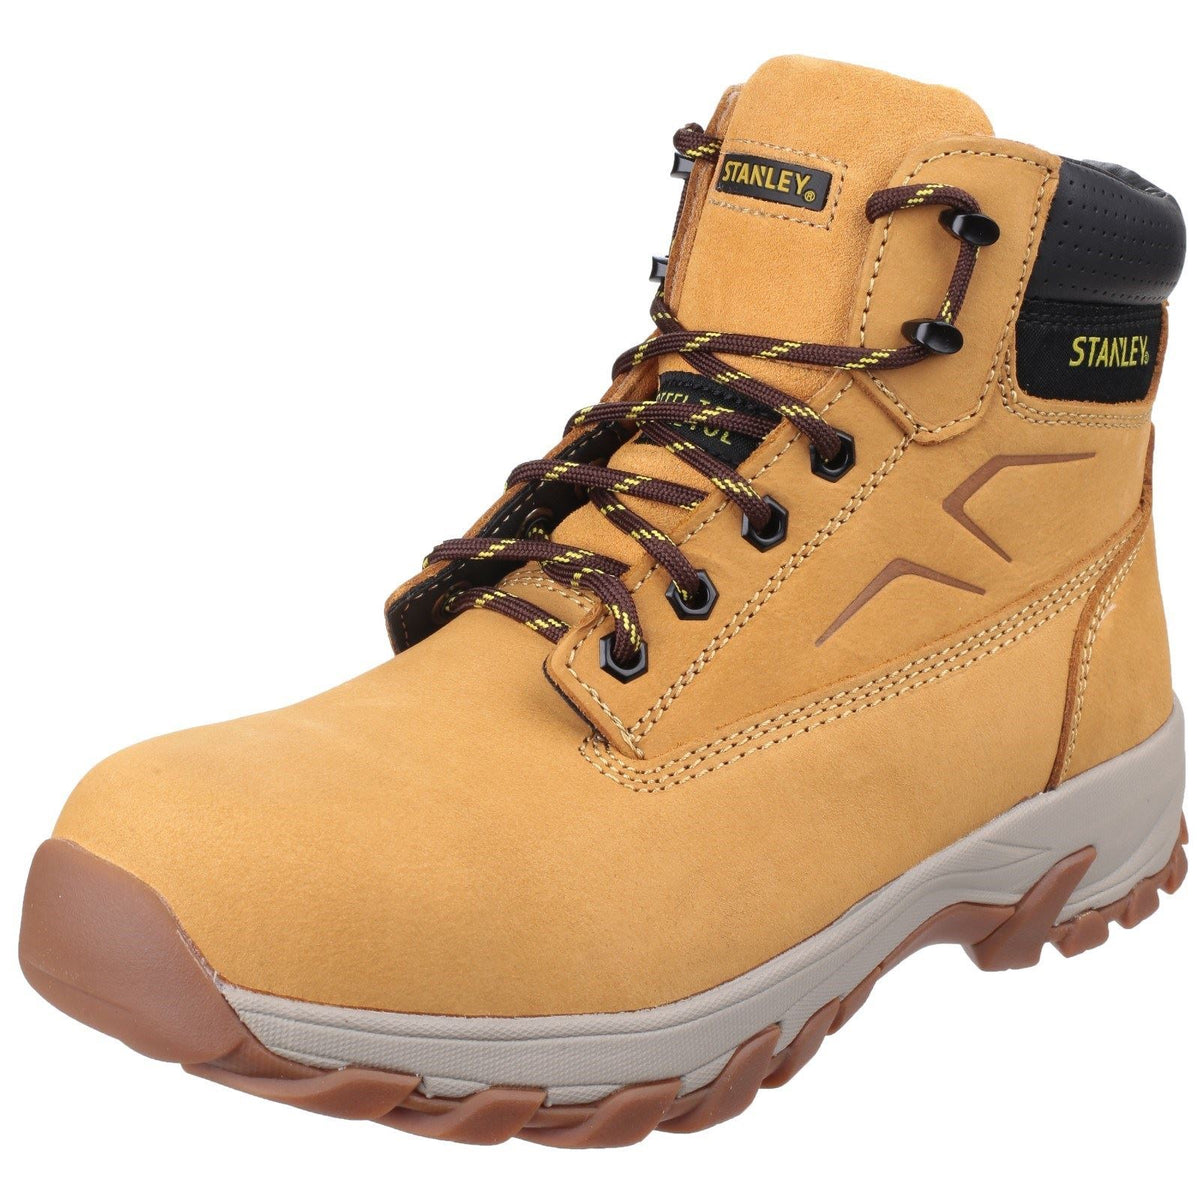 Stanley Tradesman Safety Boots